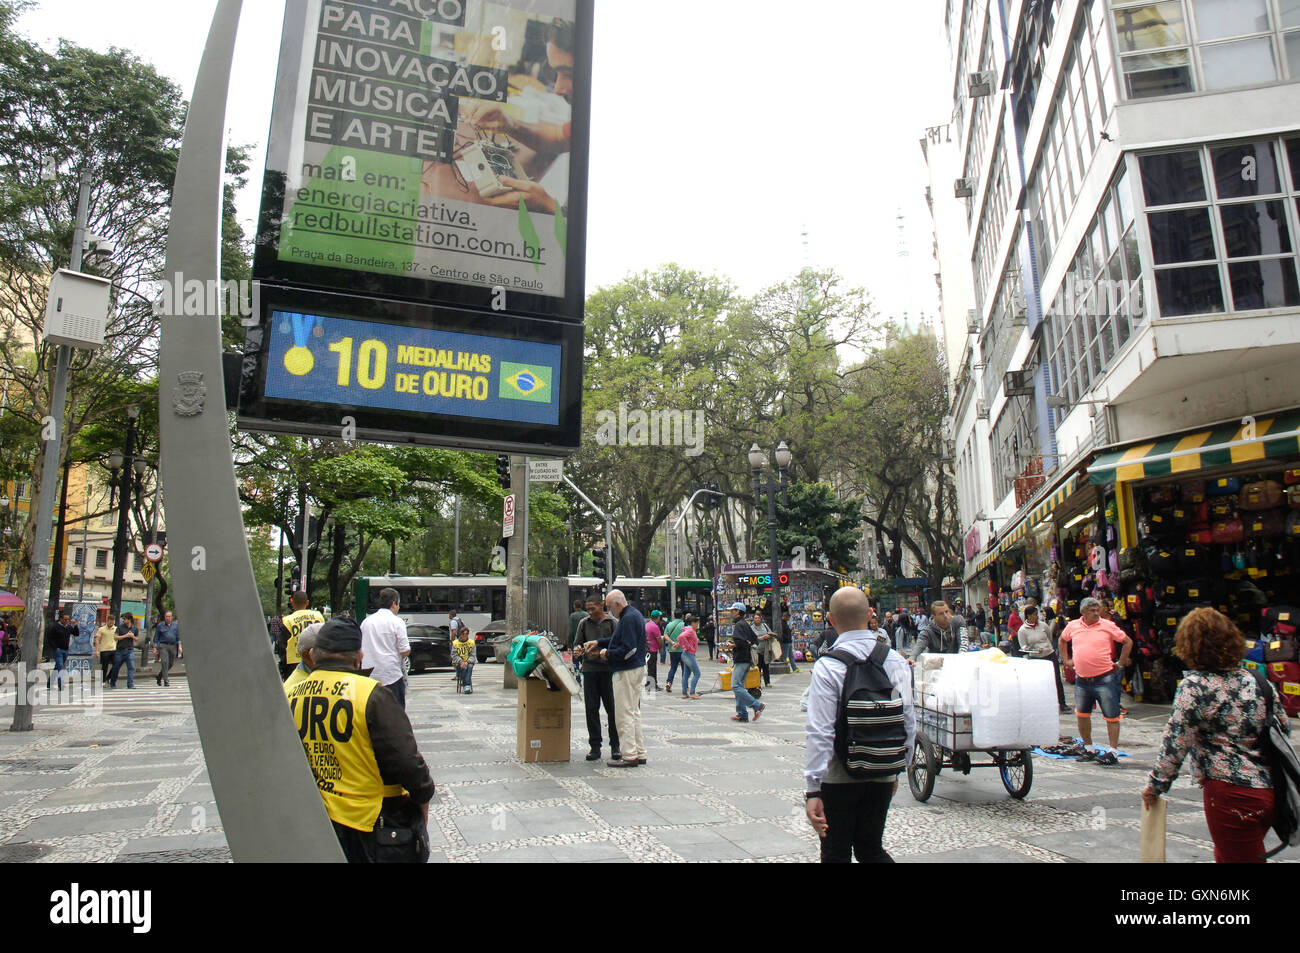 SÃO PAULO, SP - 16.09.2016: WATCHES SHOW CLASSIFICATION OF BRAZIL - The  clocks scattered around the capital to mark the time and temperature, now  they also show the number of medals and